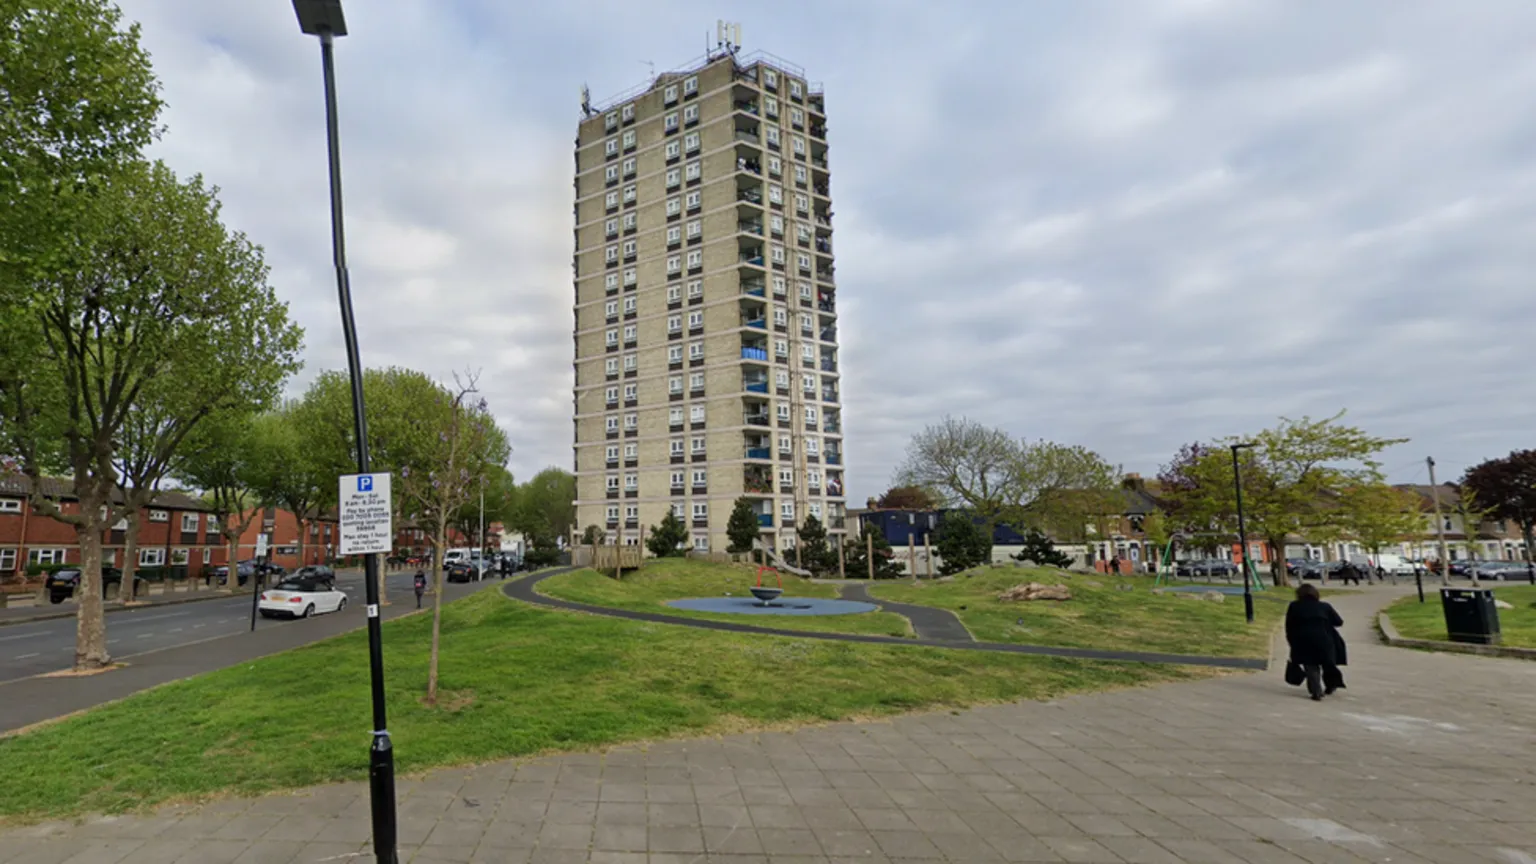 6-year-old-boy-falls-to-death-in-east-london